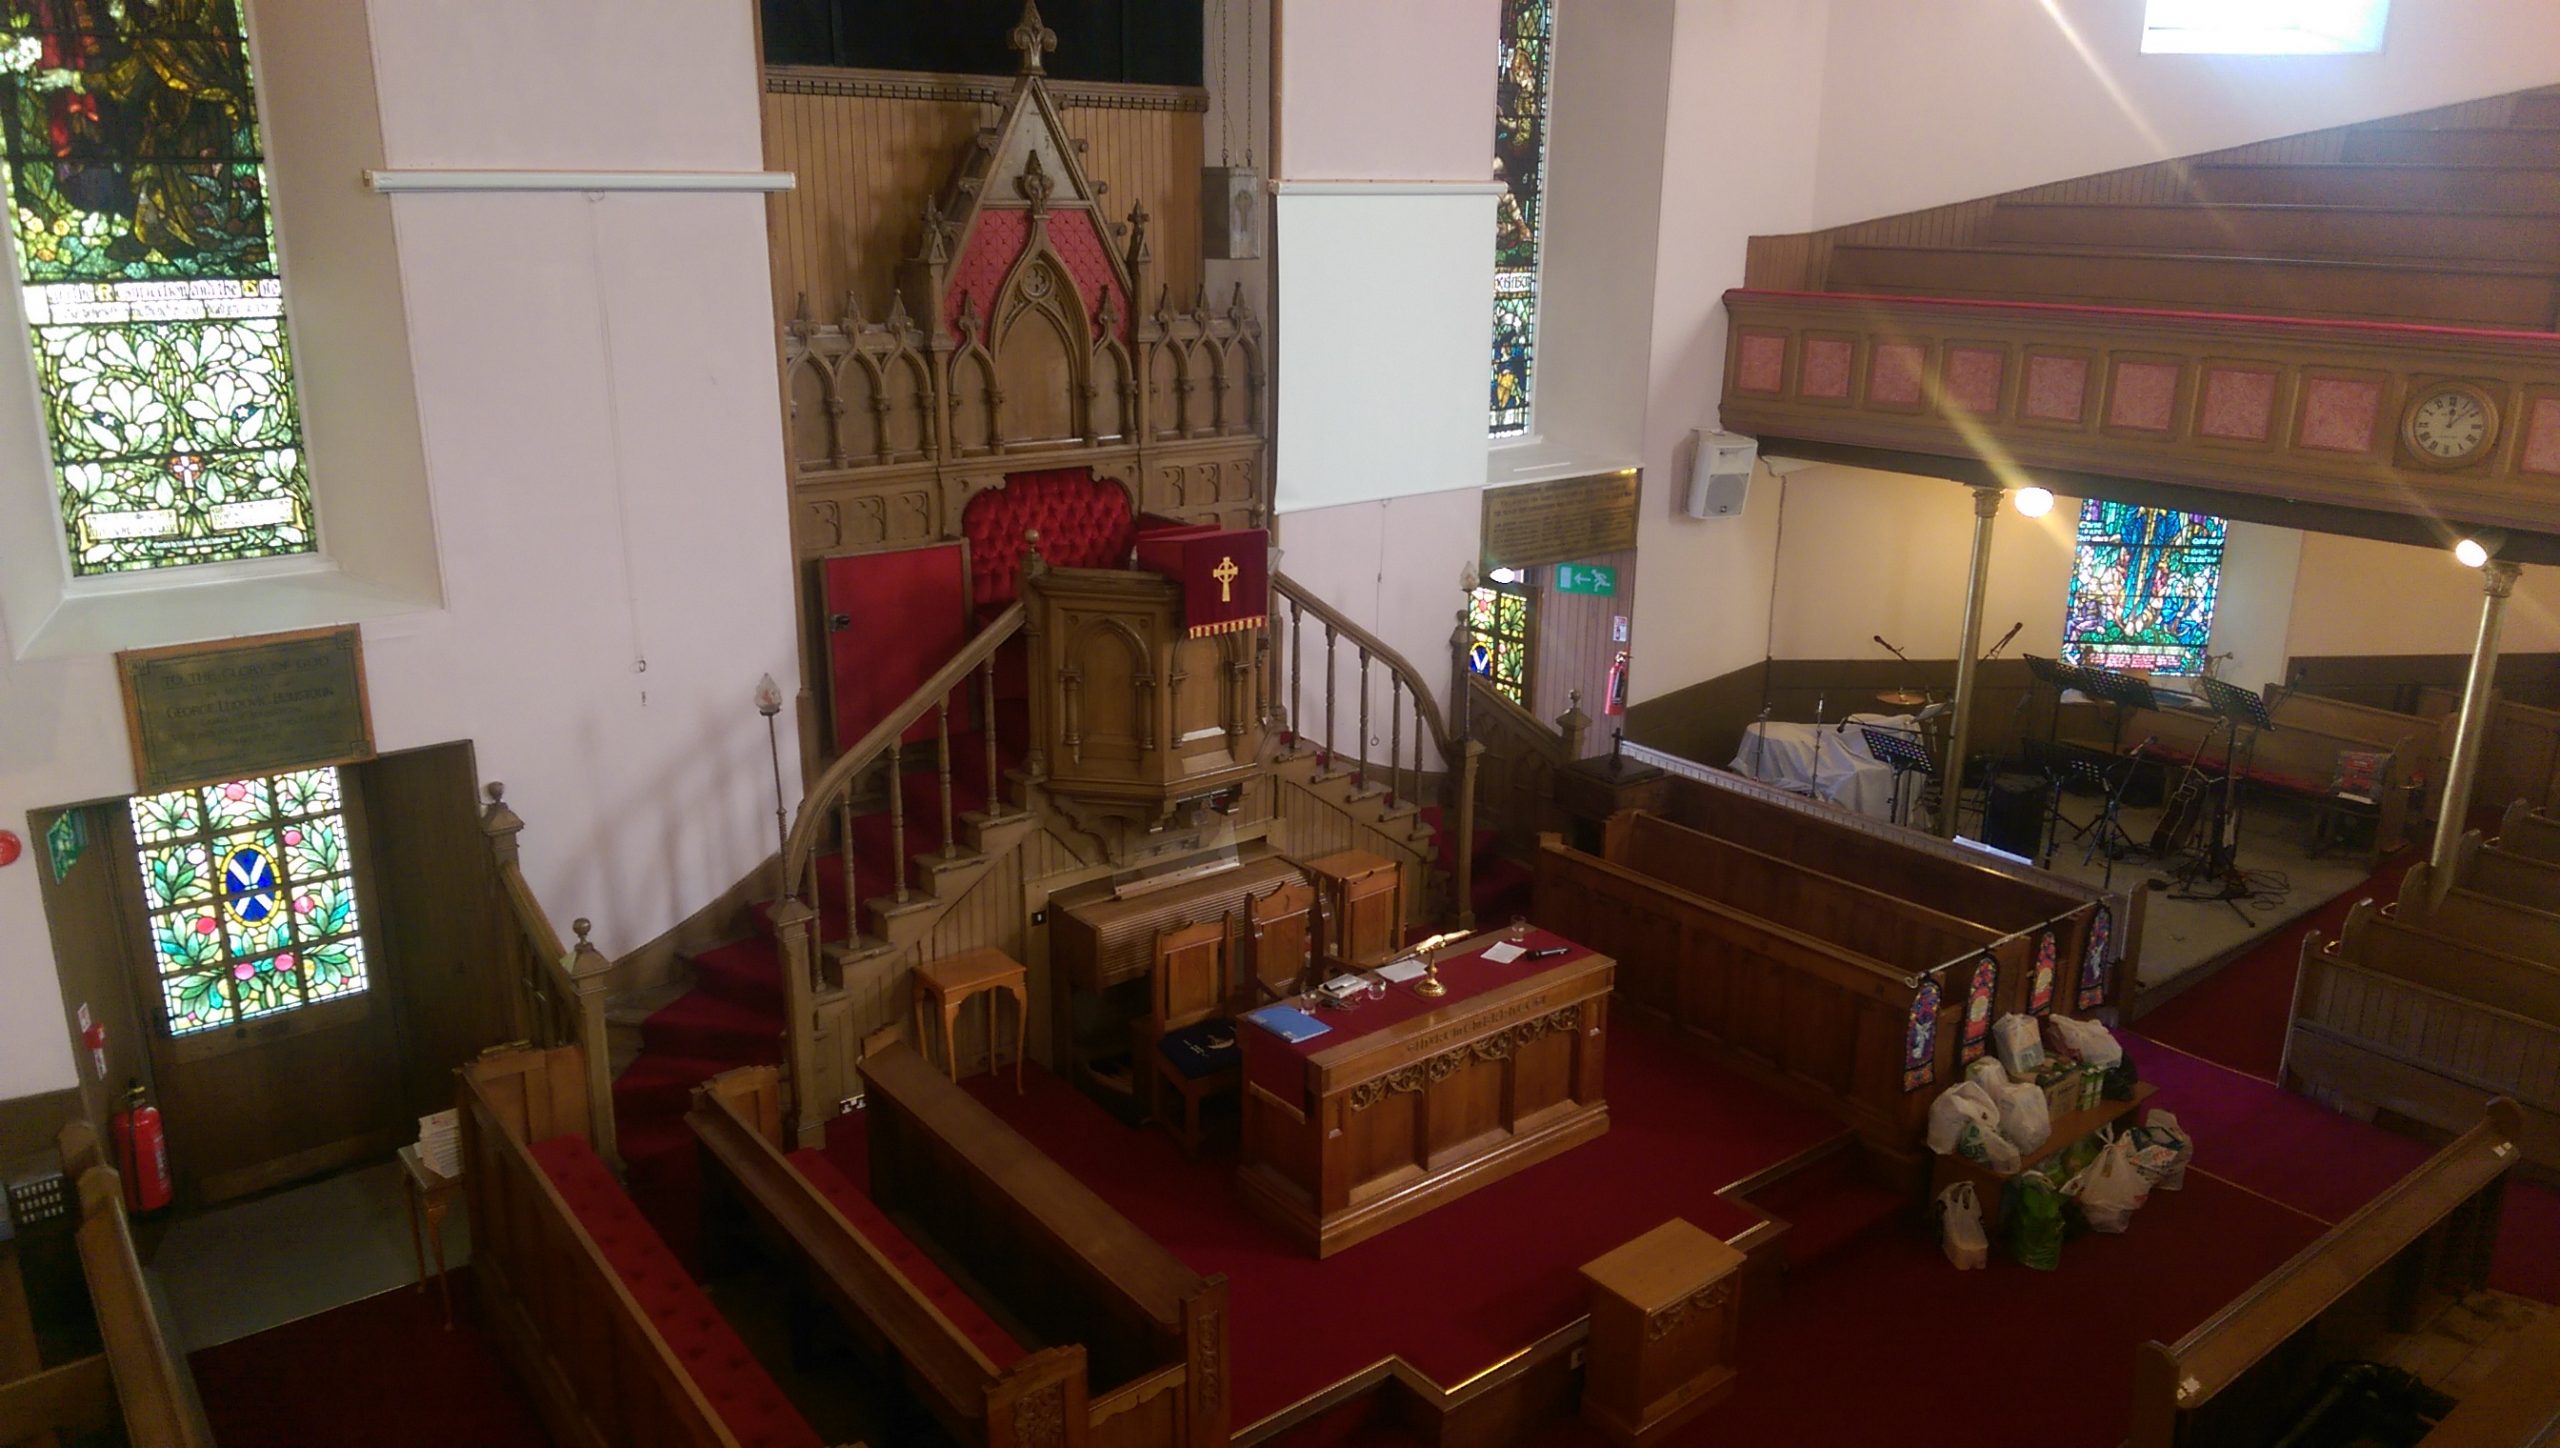 An images of the inside of Johnstone High Parish